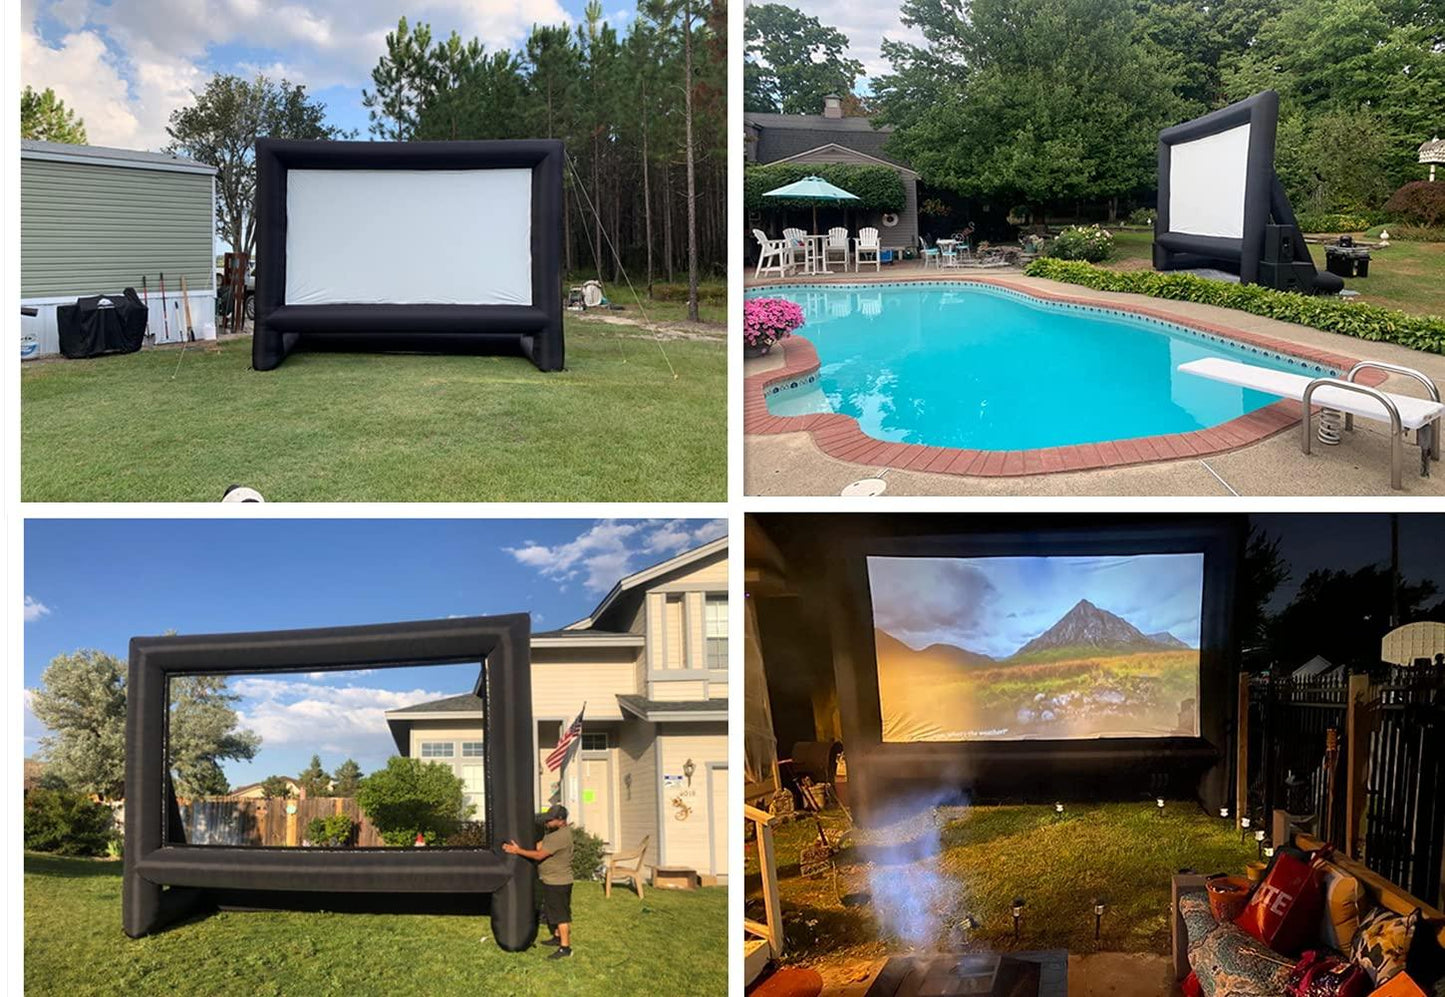 XHYCPY 20 Feet Inflatable Projector Screen Outdoor Inflatable Movie Screen with Air Blower Storage Bag, Easy Set Up Blow Up Screen for Backyard Movie Night, Theme Parties, Celebrations - CookCave